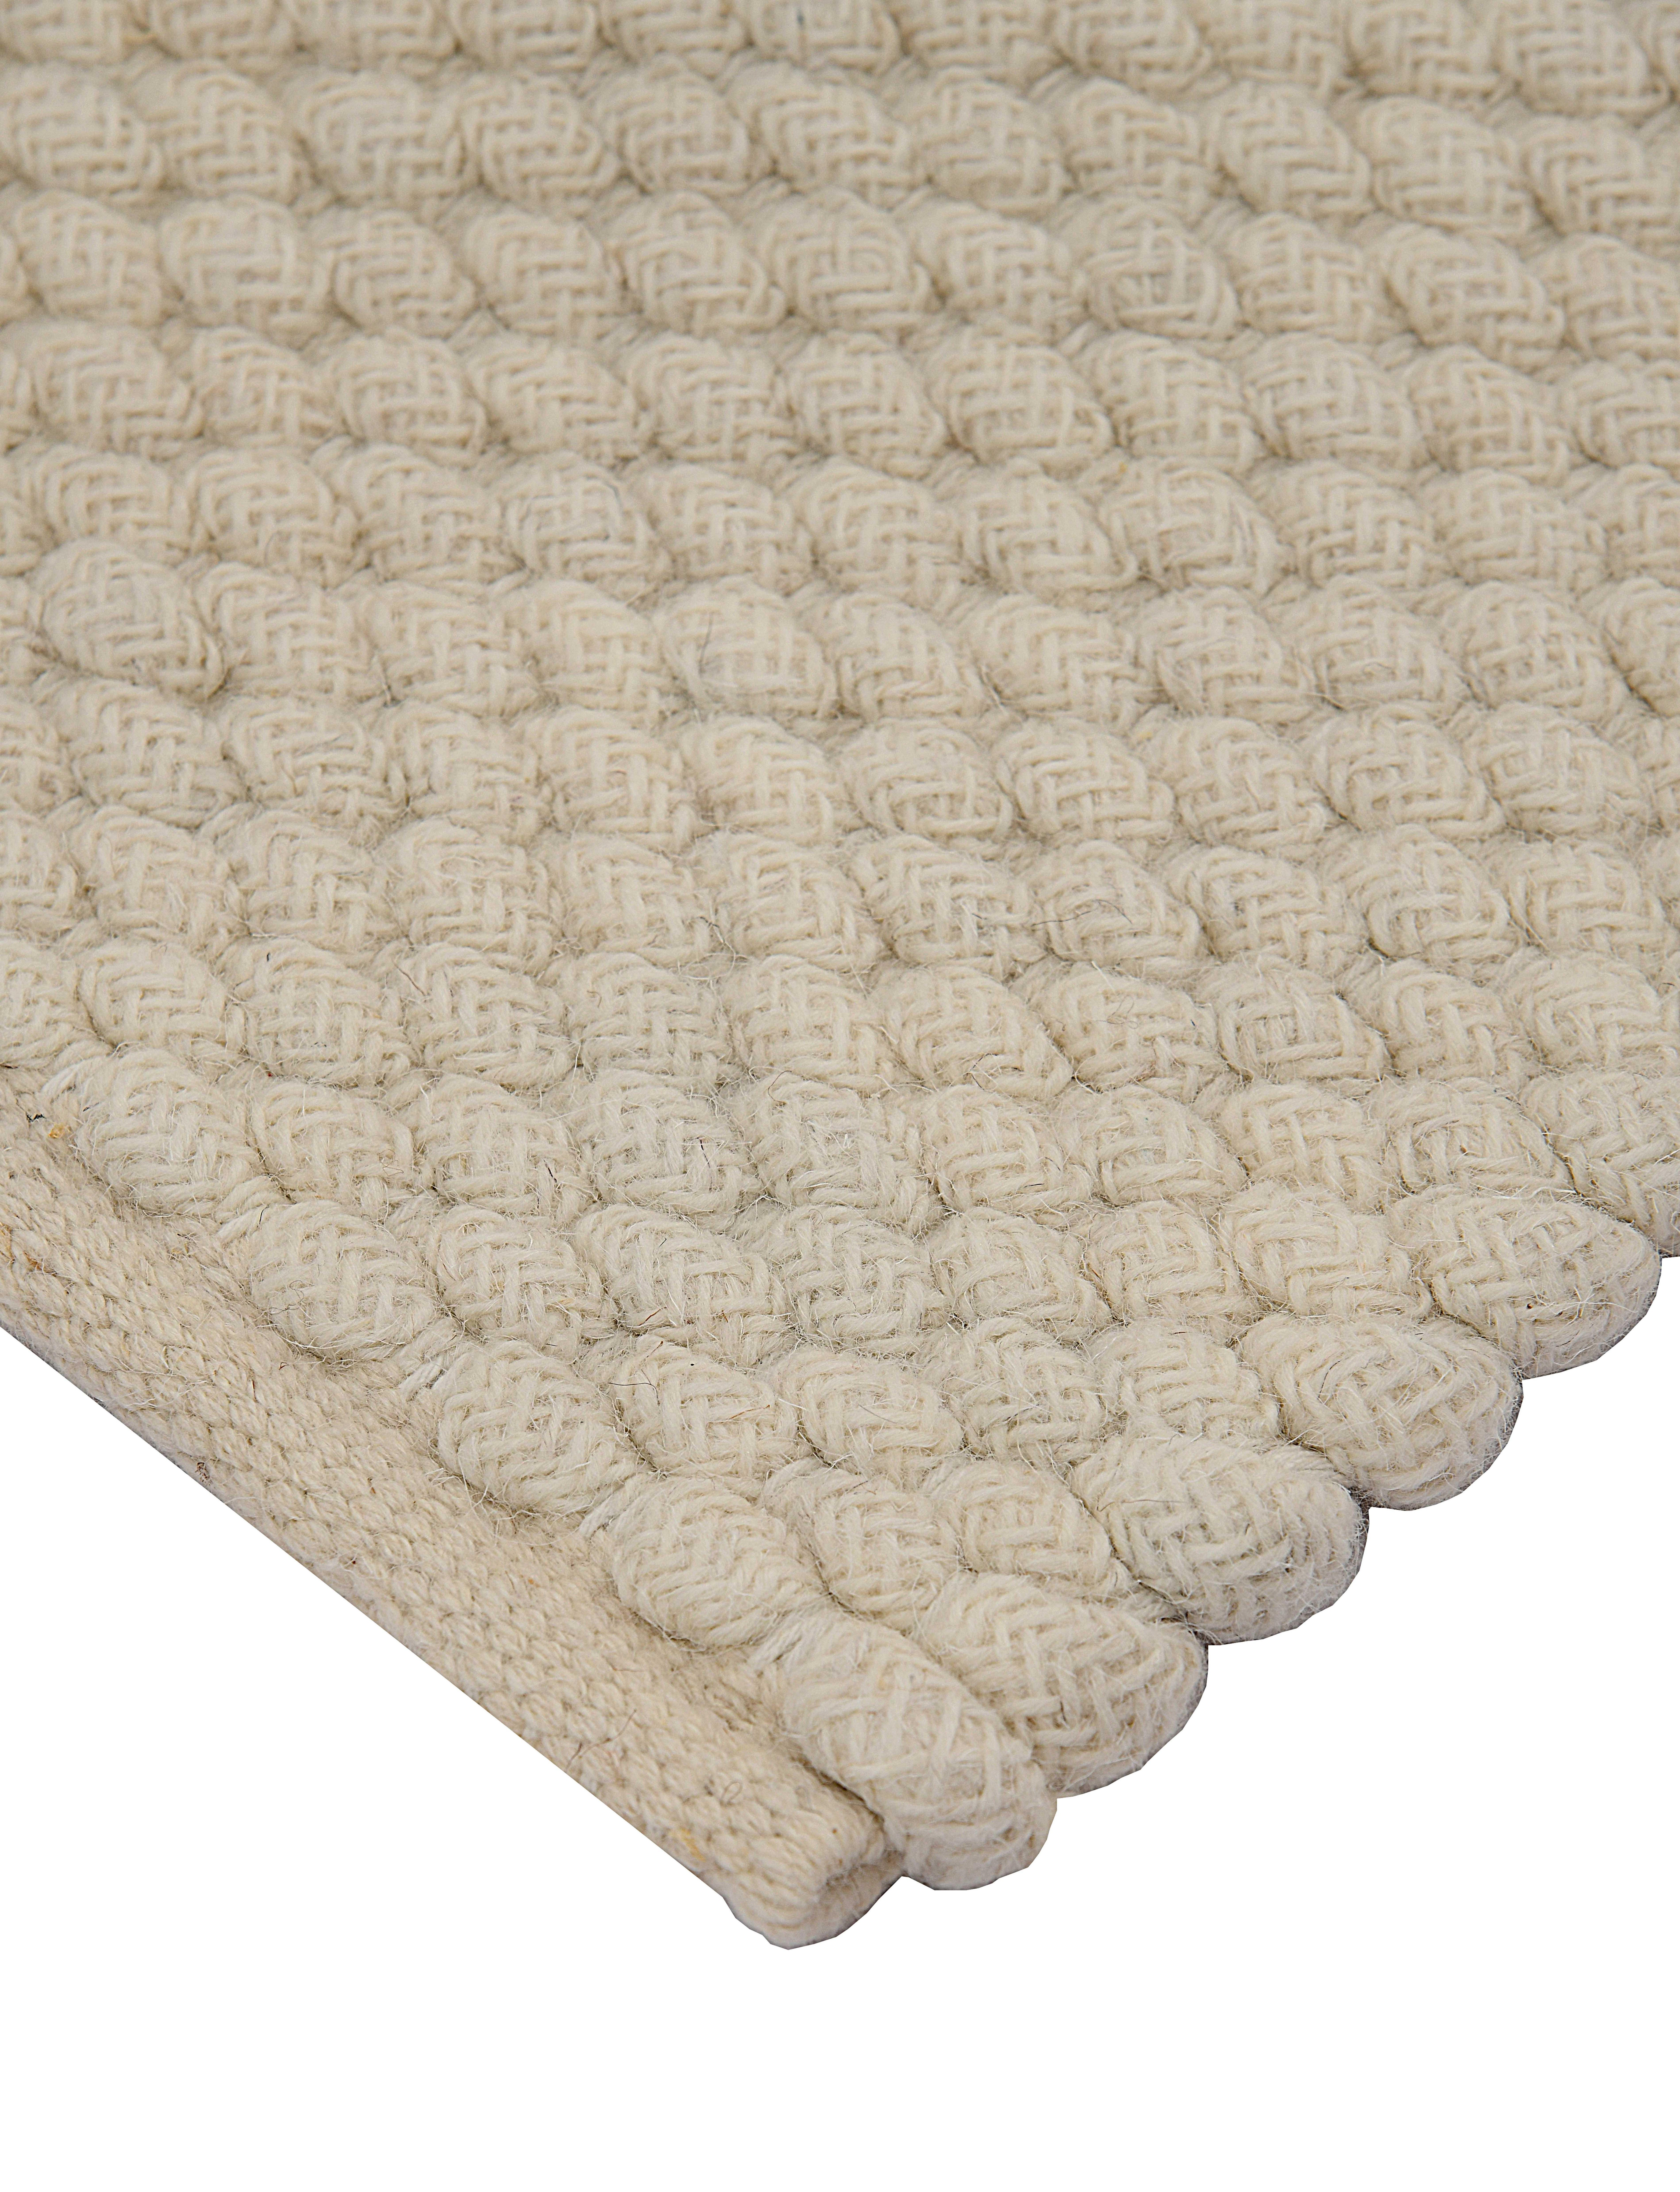 Indian Acia, Ivory, Handwoven Face: 60% Undyed NZ Wool, 40% Undyed MED Wool, 8' x 10' For Sale